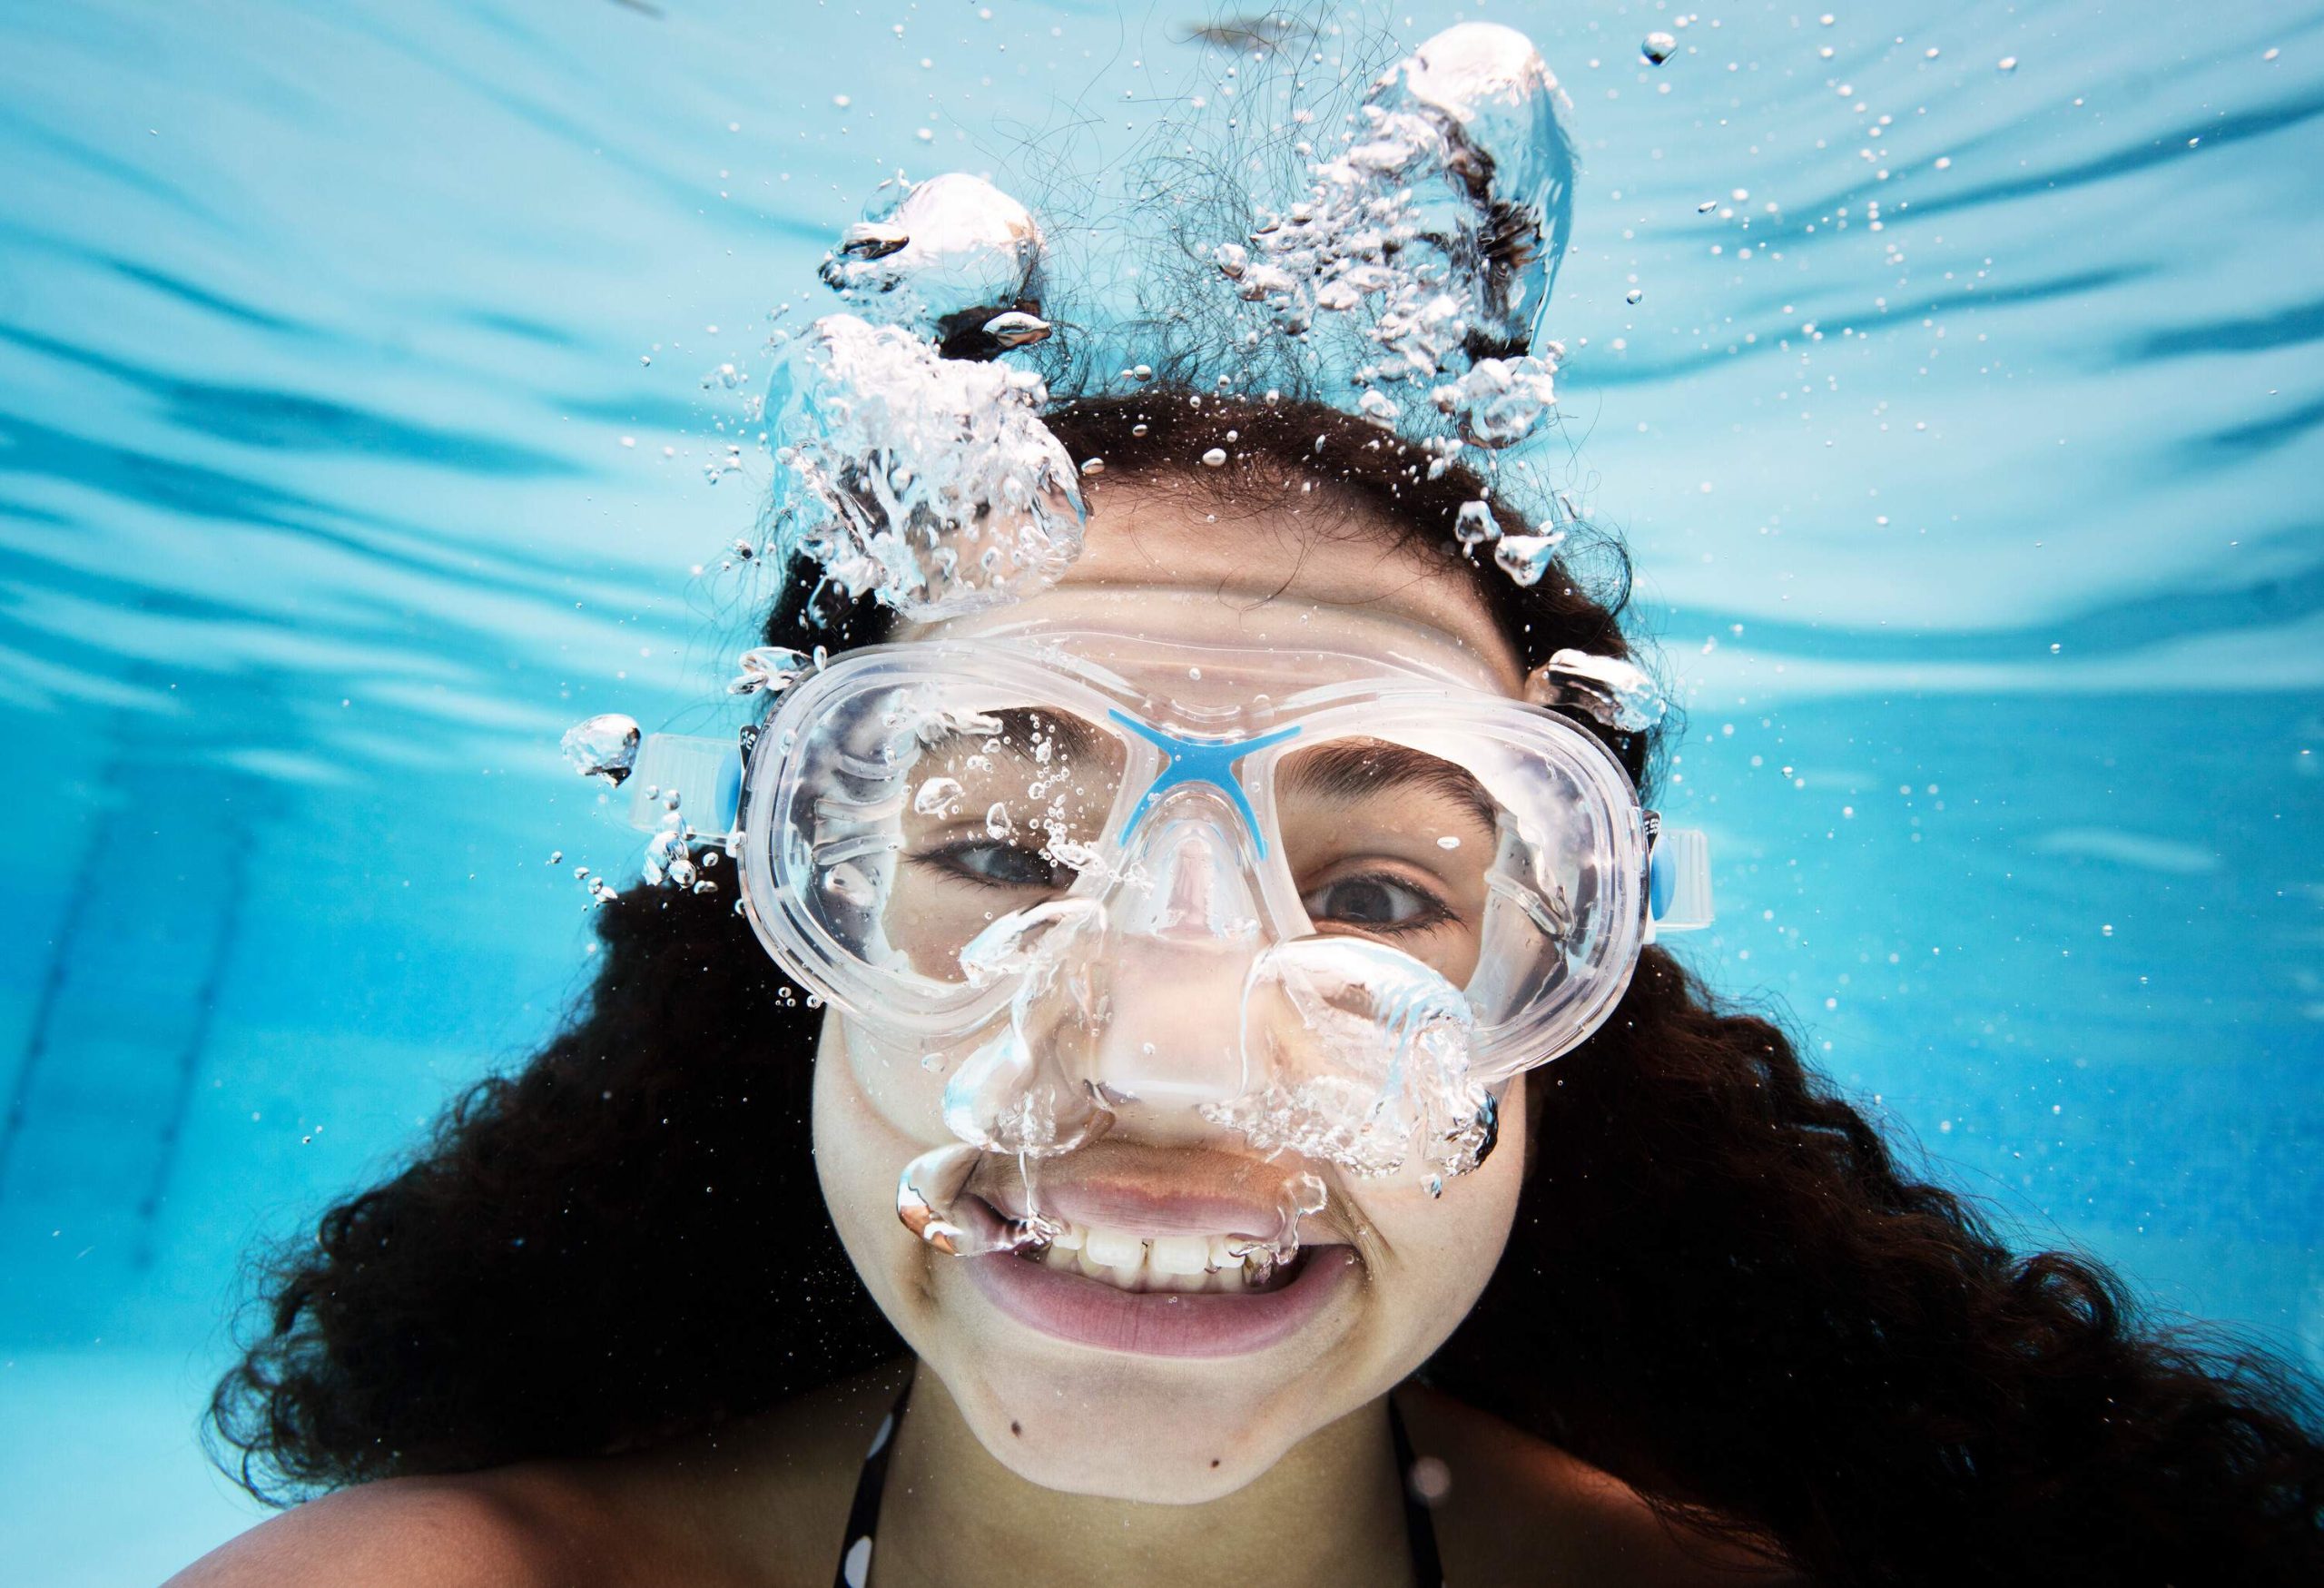 A teen girl smiles at the camera while blowing bubbles underwater.